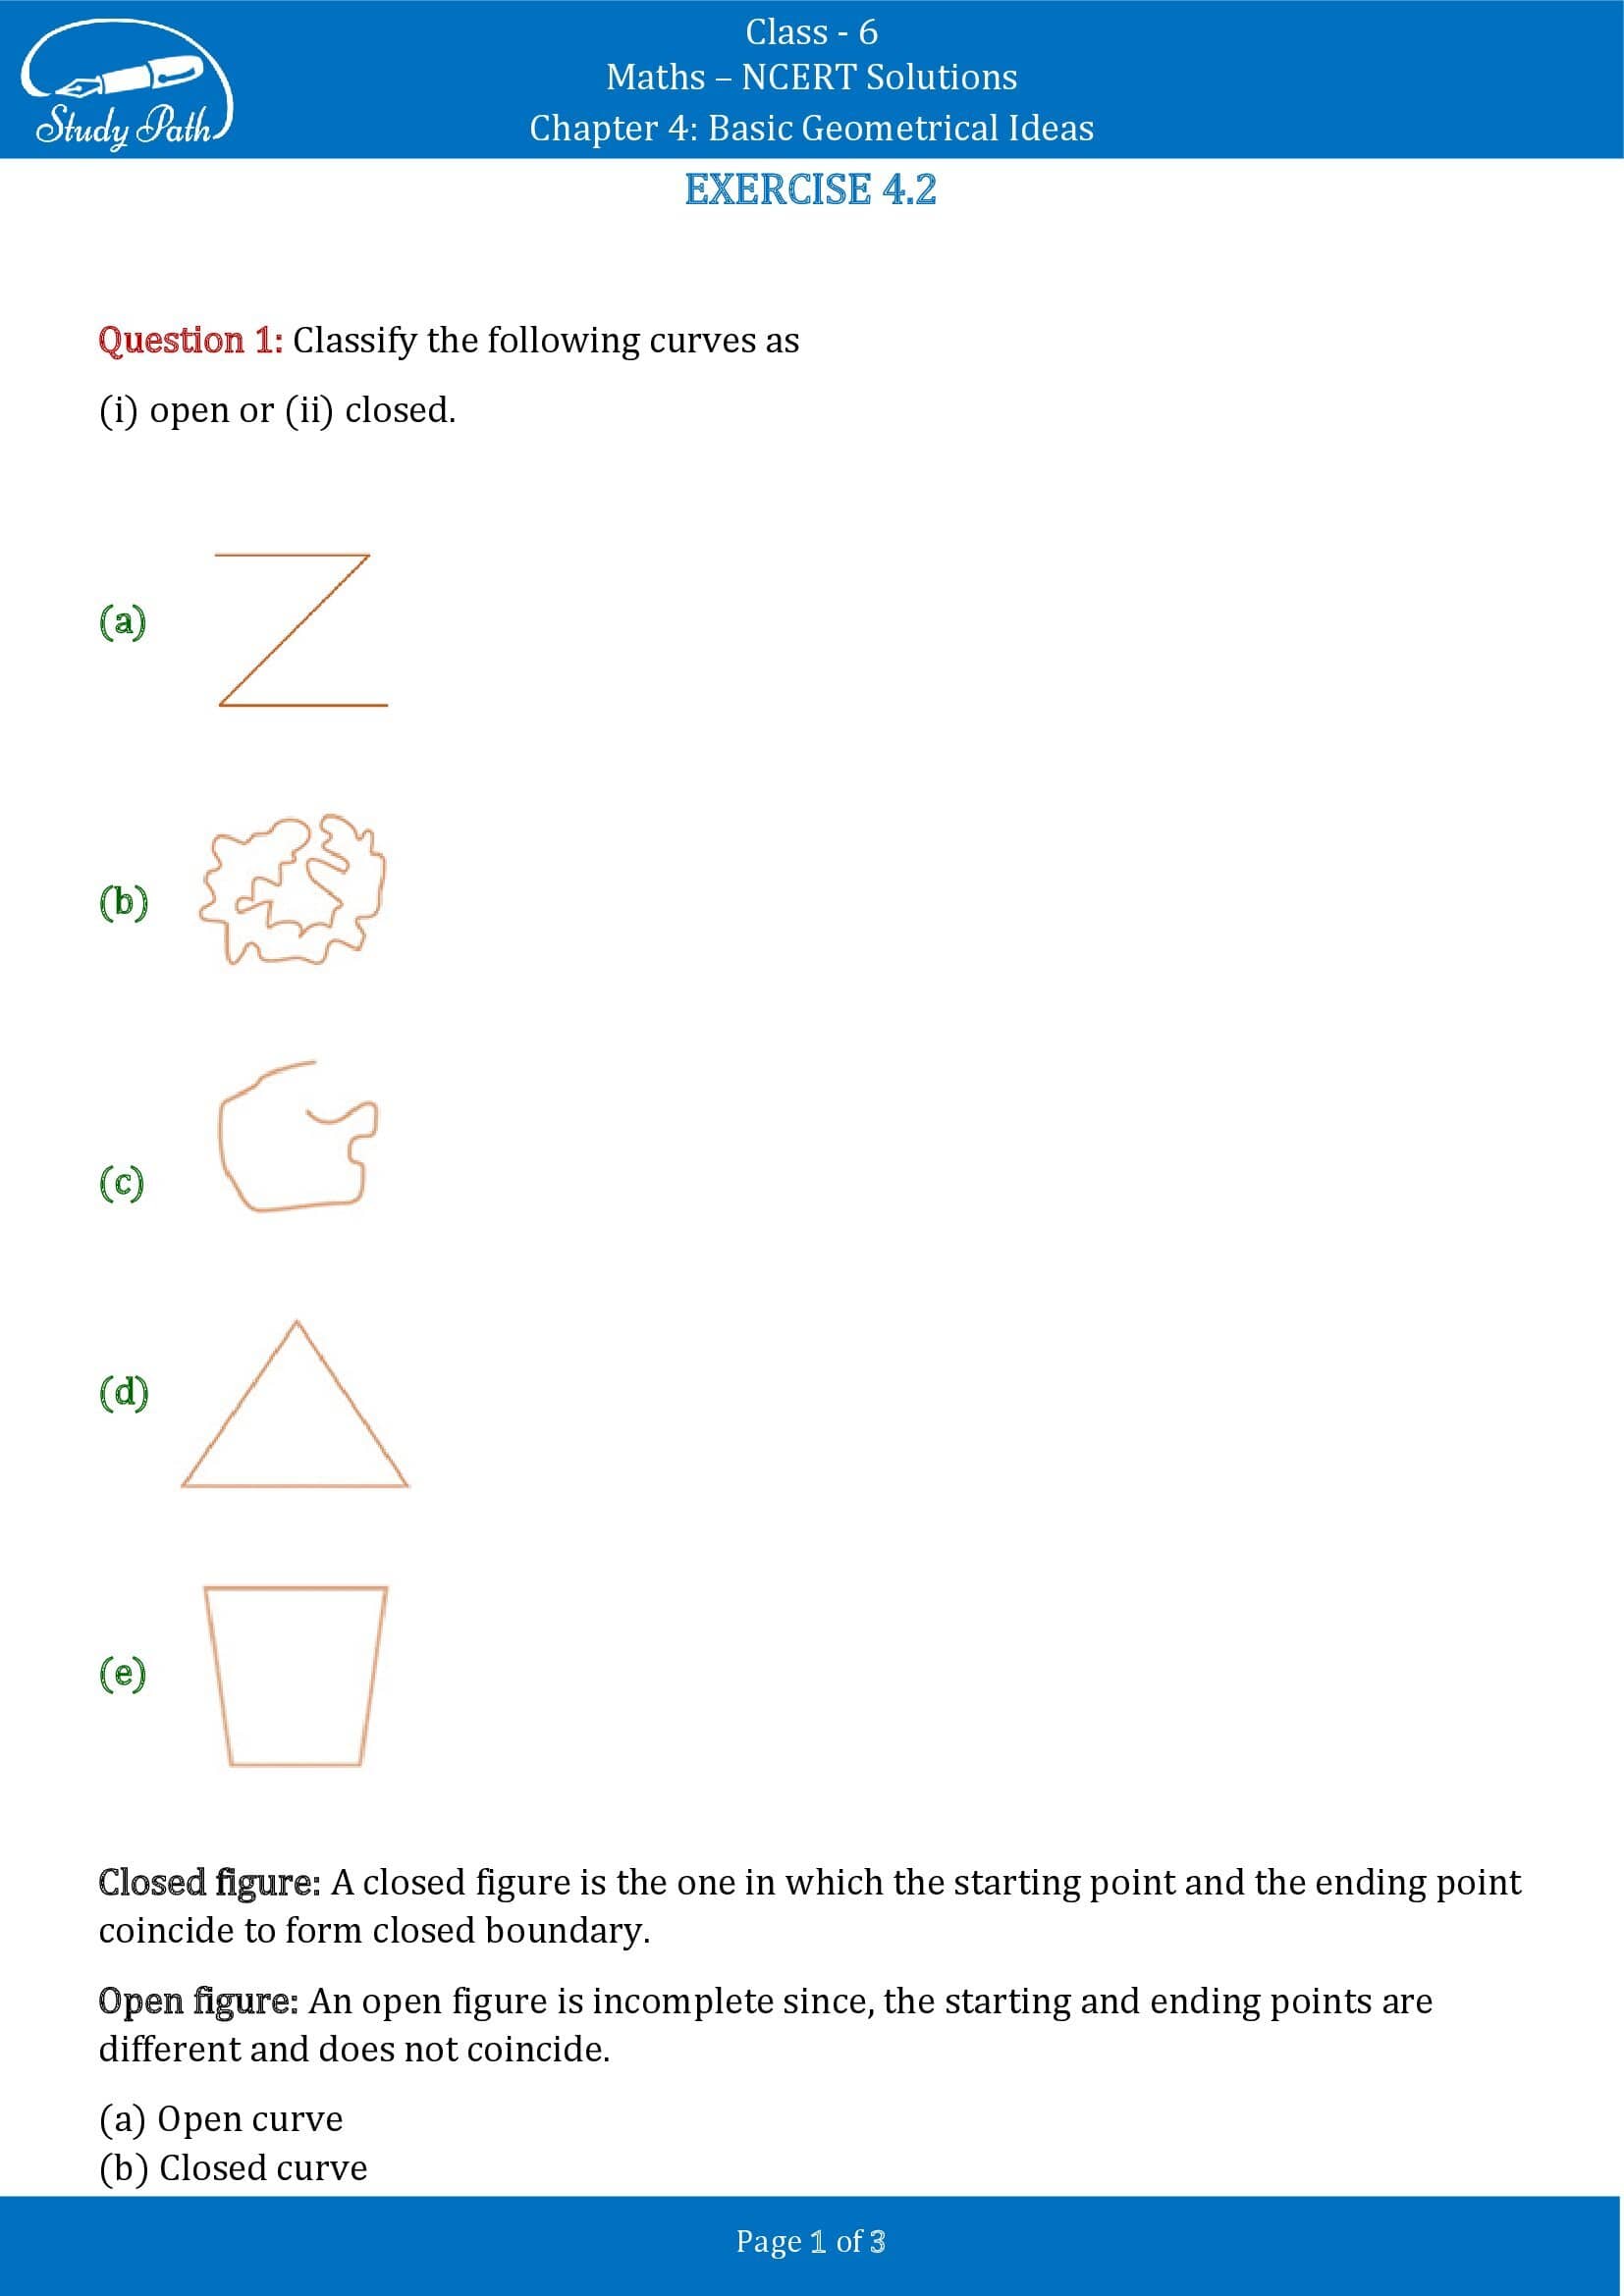 NCERT Solutions for Class 6 Maths Chapter 4 Basic Geometrical Ideas Exercise 4.2 00001